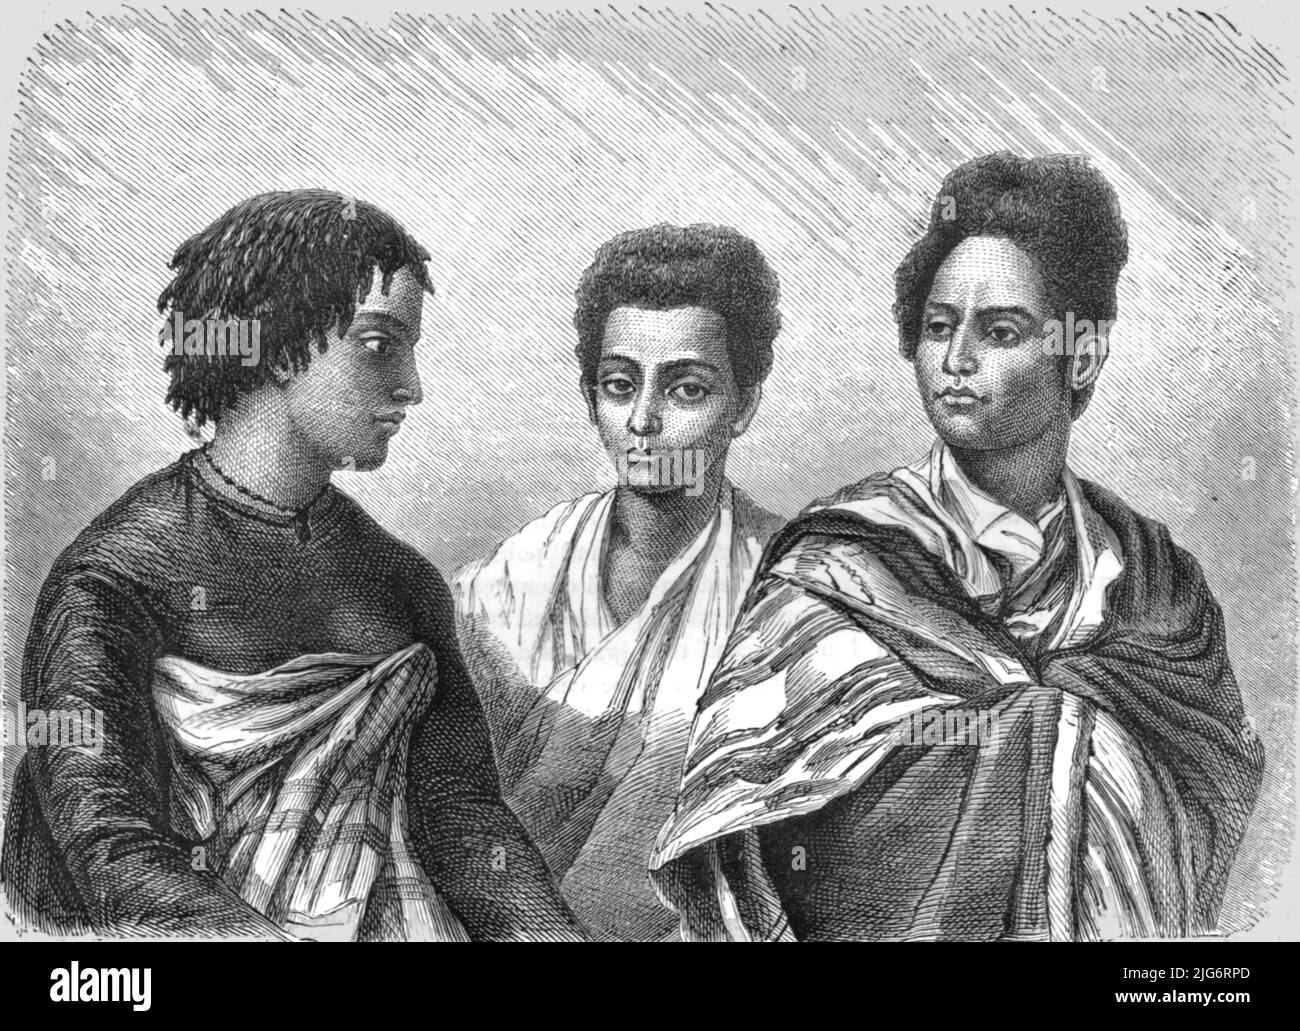 'Hovahs; Recent Explorations in Madagascar', 1875. ['The Hova, or free commoners, were one of the three principal historical castes in the Merina Kingdom of Madagascar']. From, 'Illustrated Travels' by H.W. Bates. [Cassell, Petter, and Galpin, c1880, London] Belle Sauvage Works.London E.C. Stock Photo